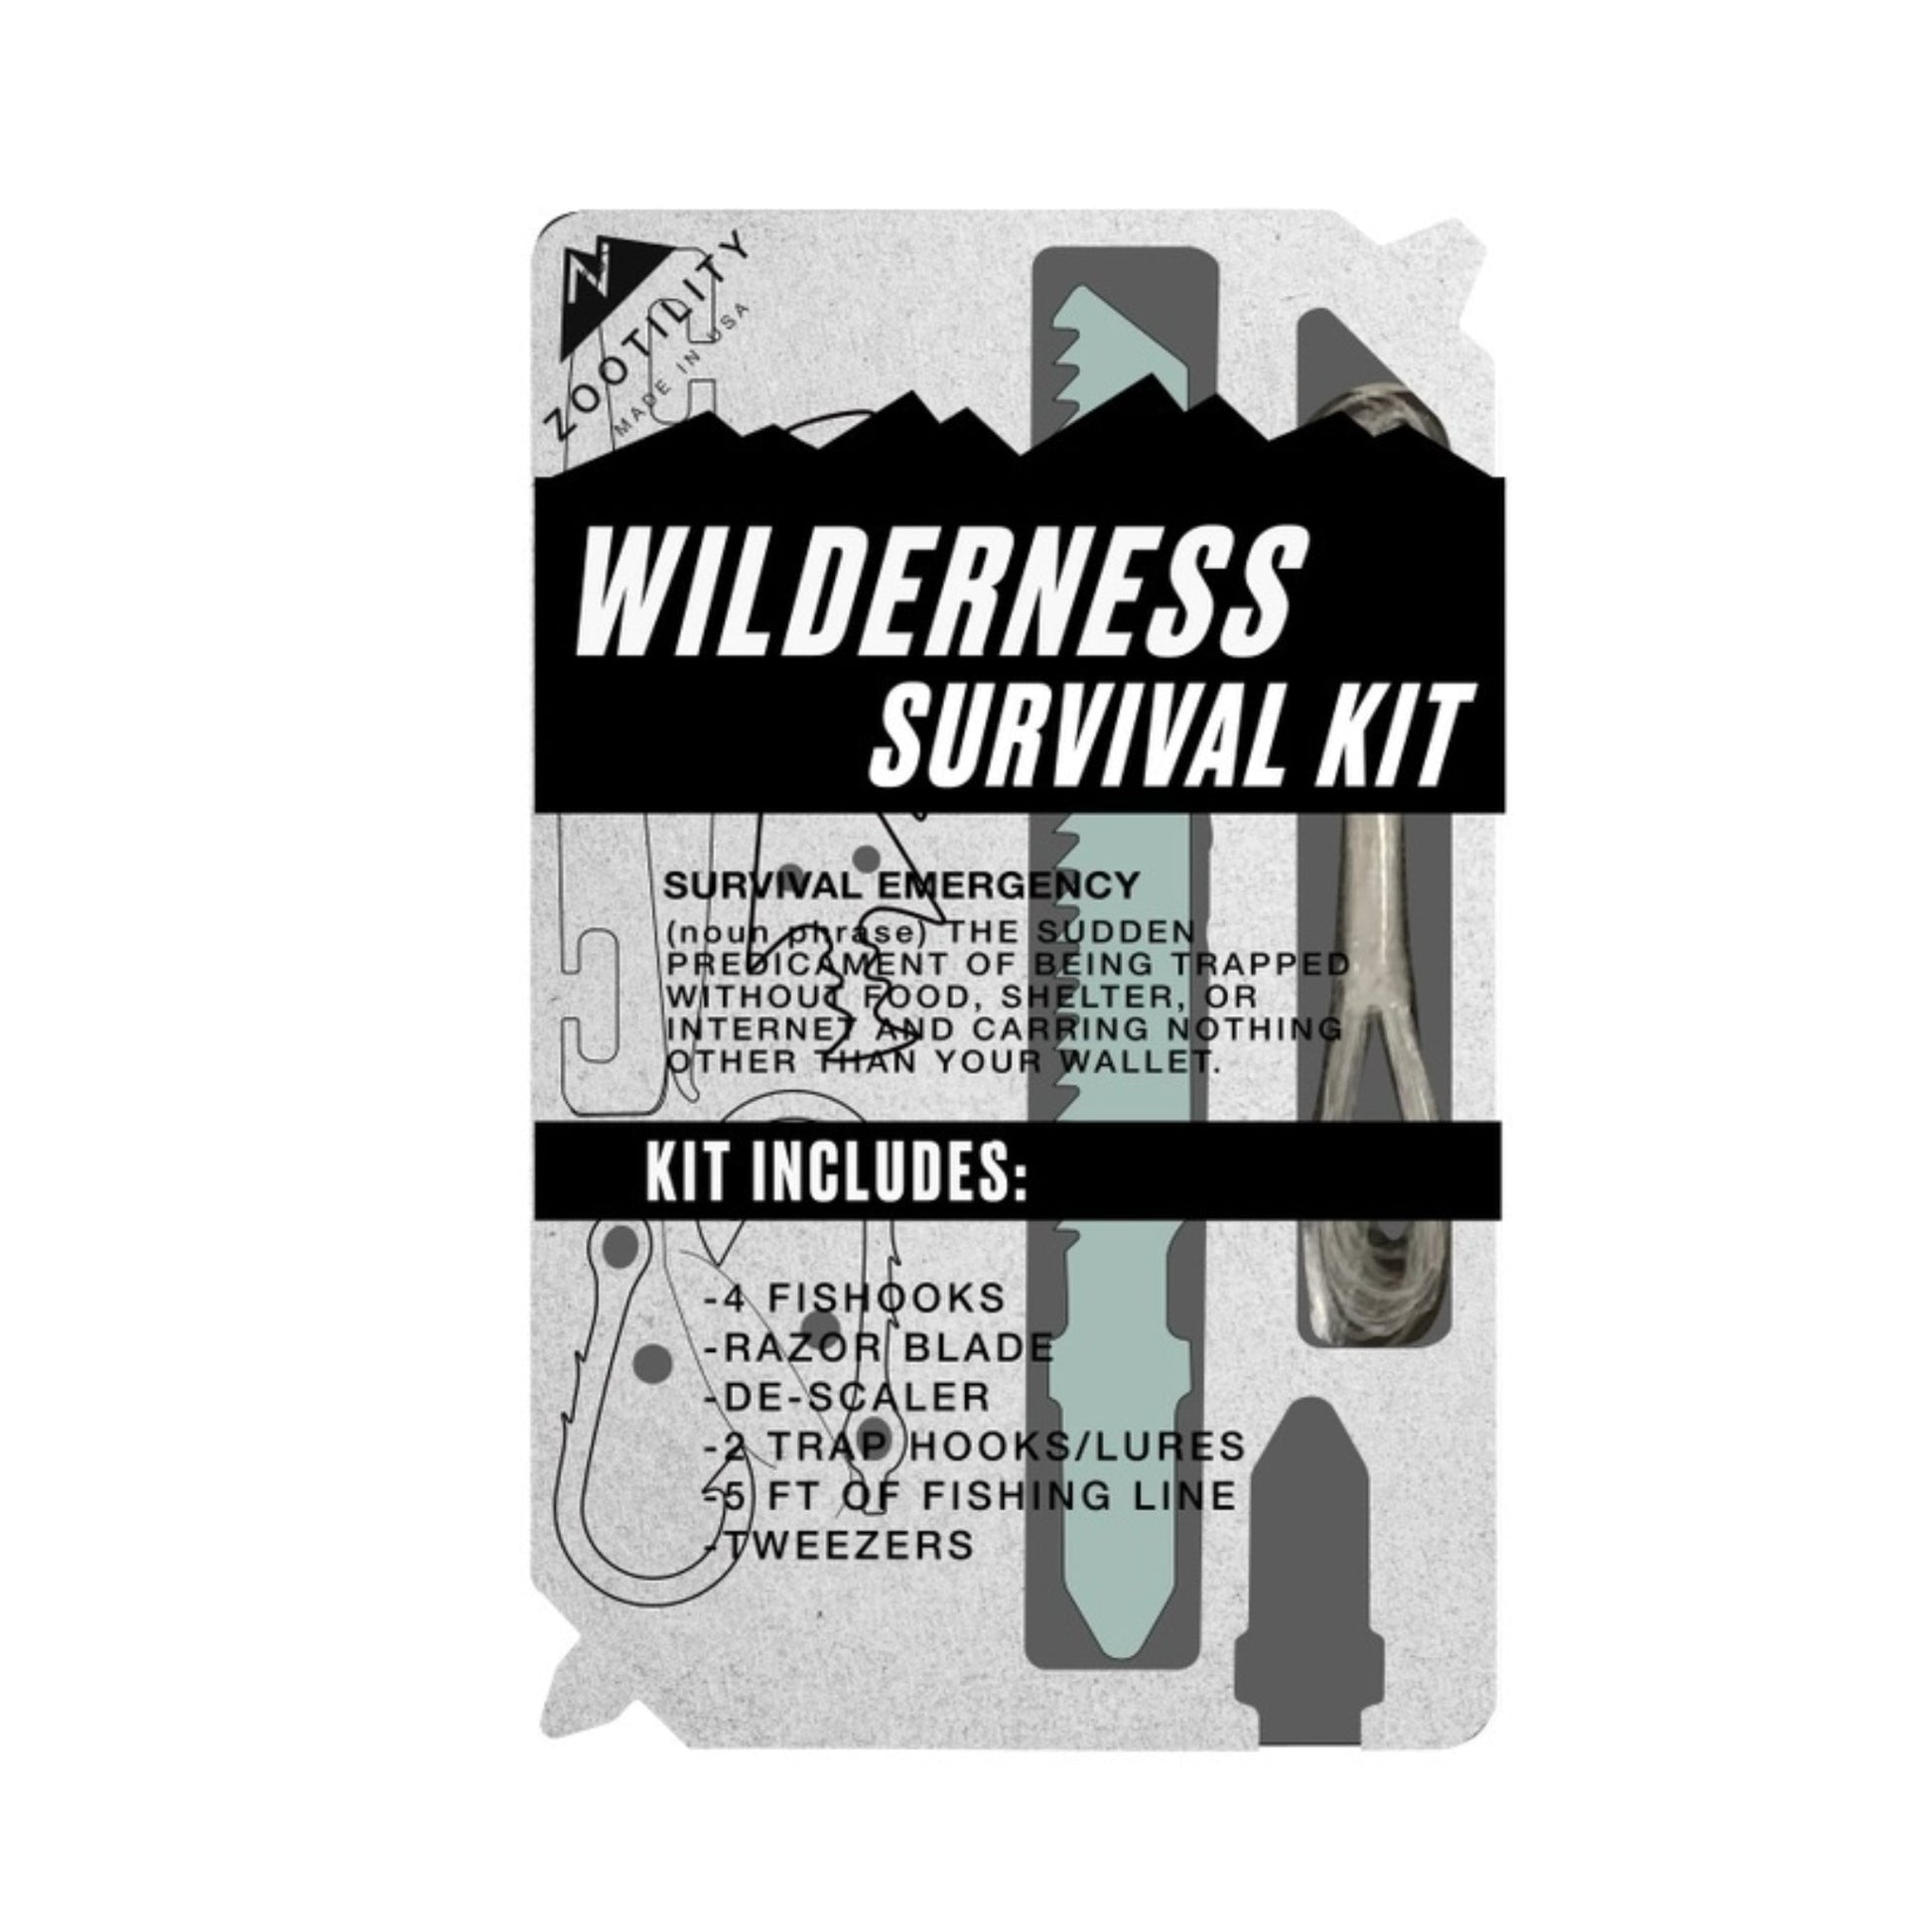 Pocket Wilderness Survival Kit - Made in the USA